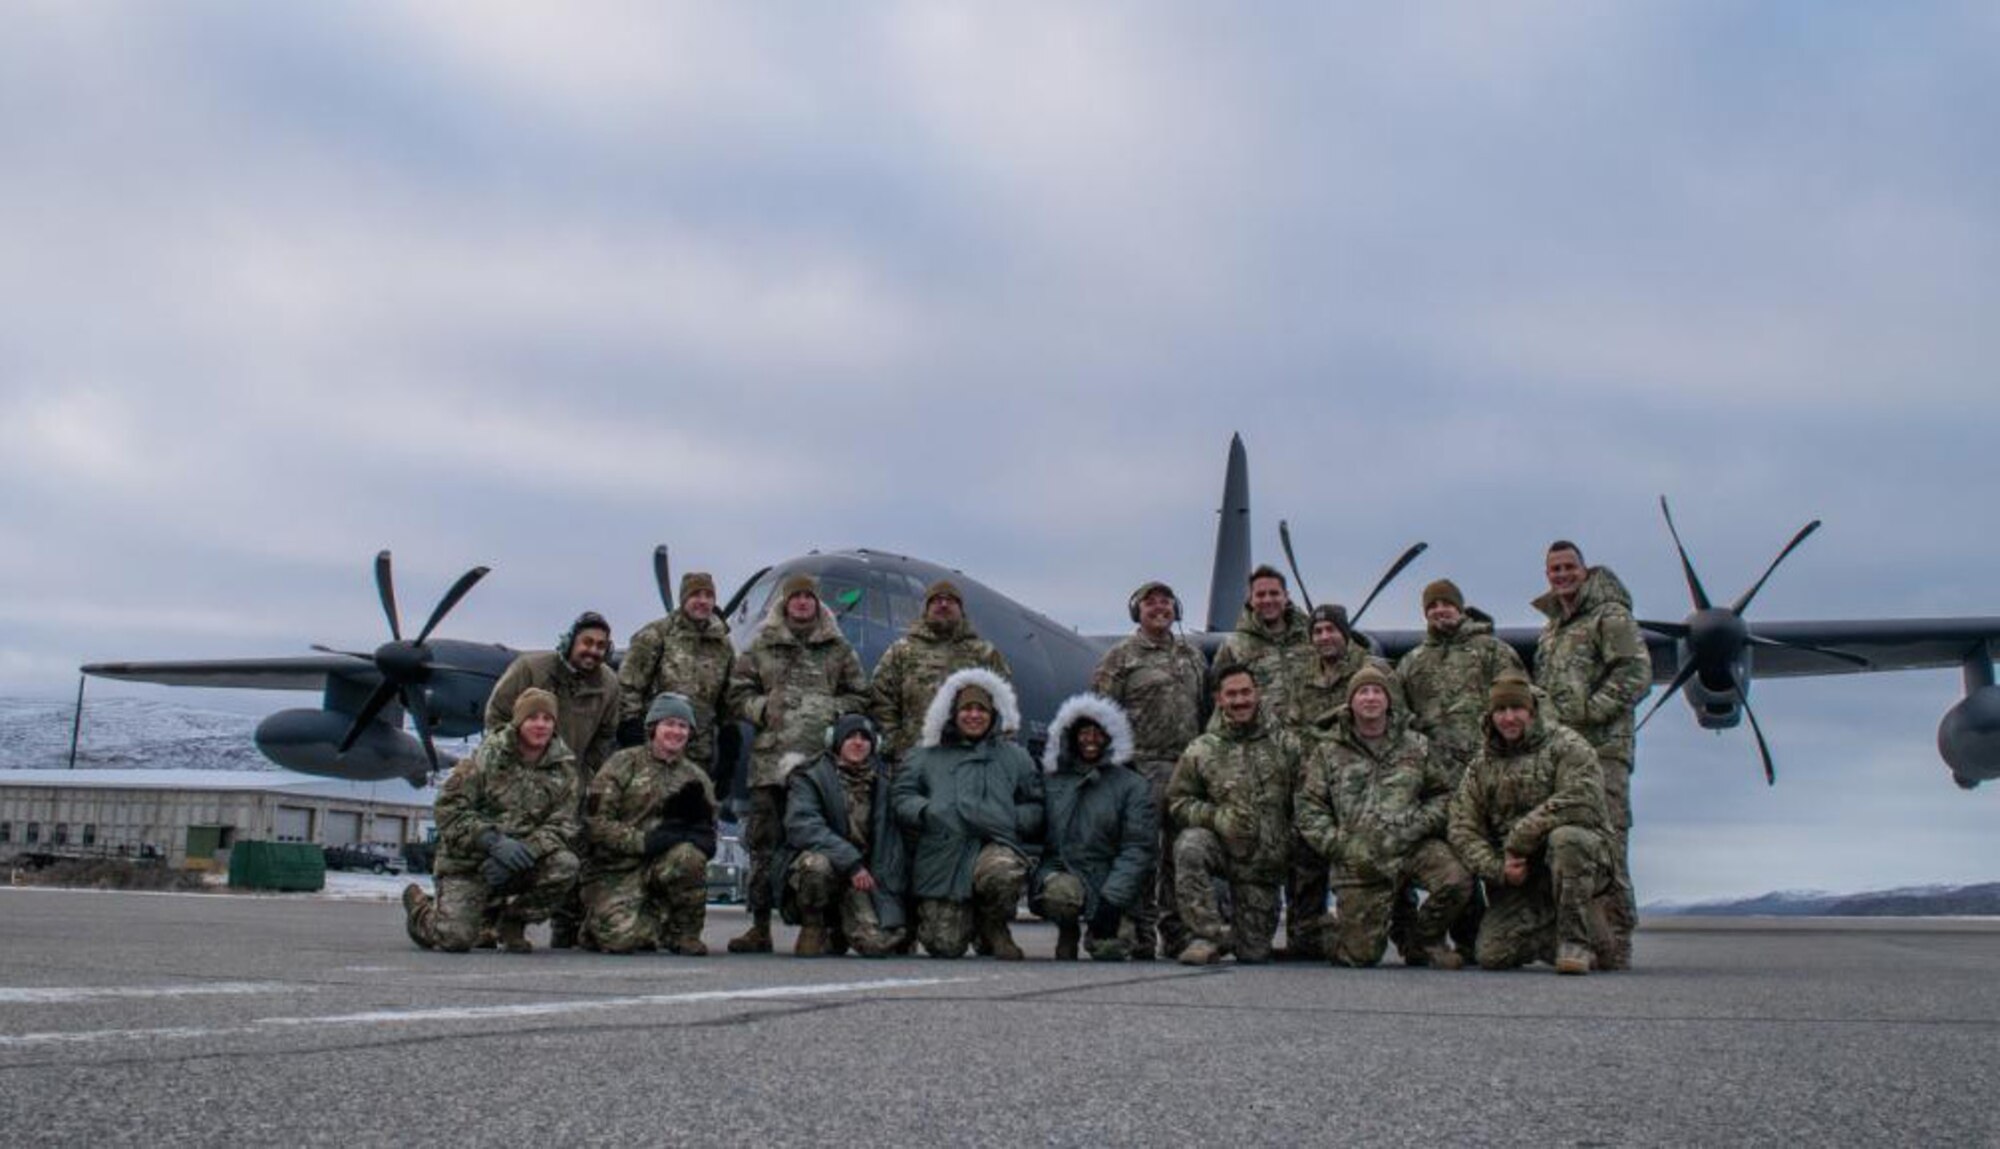 New York Air National Guard members assigned to the 106th Rescue Wing pose for a photograph in Kangerlussuaq, Greenland following a week-long training mission with the Danish military on Nov. 9, 2021. The Airmen deployed to Greenland along with members of the New York Air National Guard's 109th Airlift Wing to be part of a search and rescue training exercise.